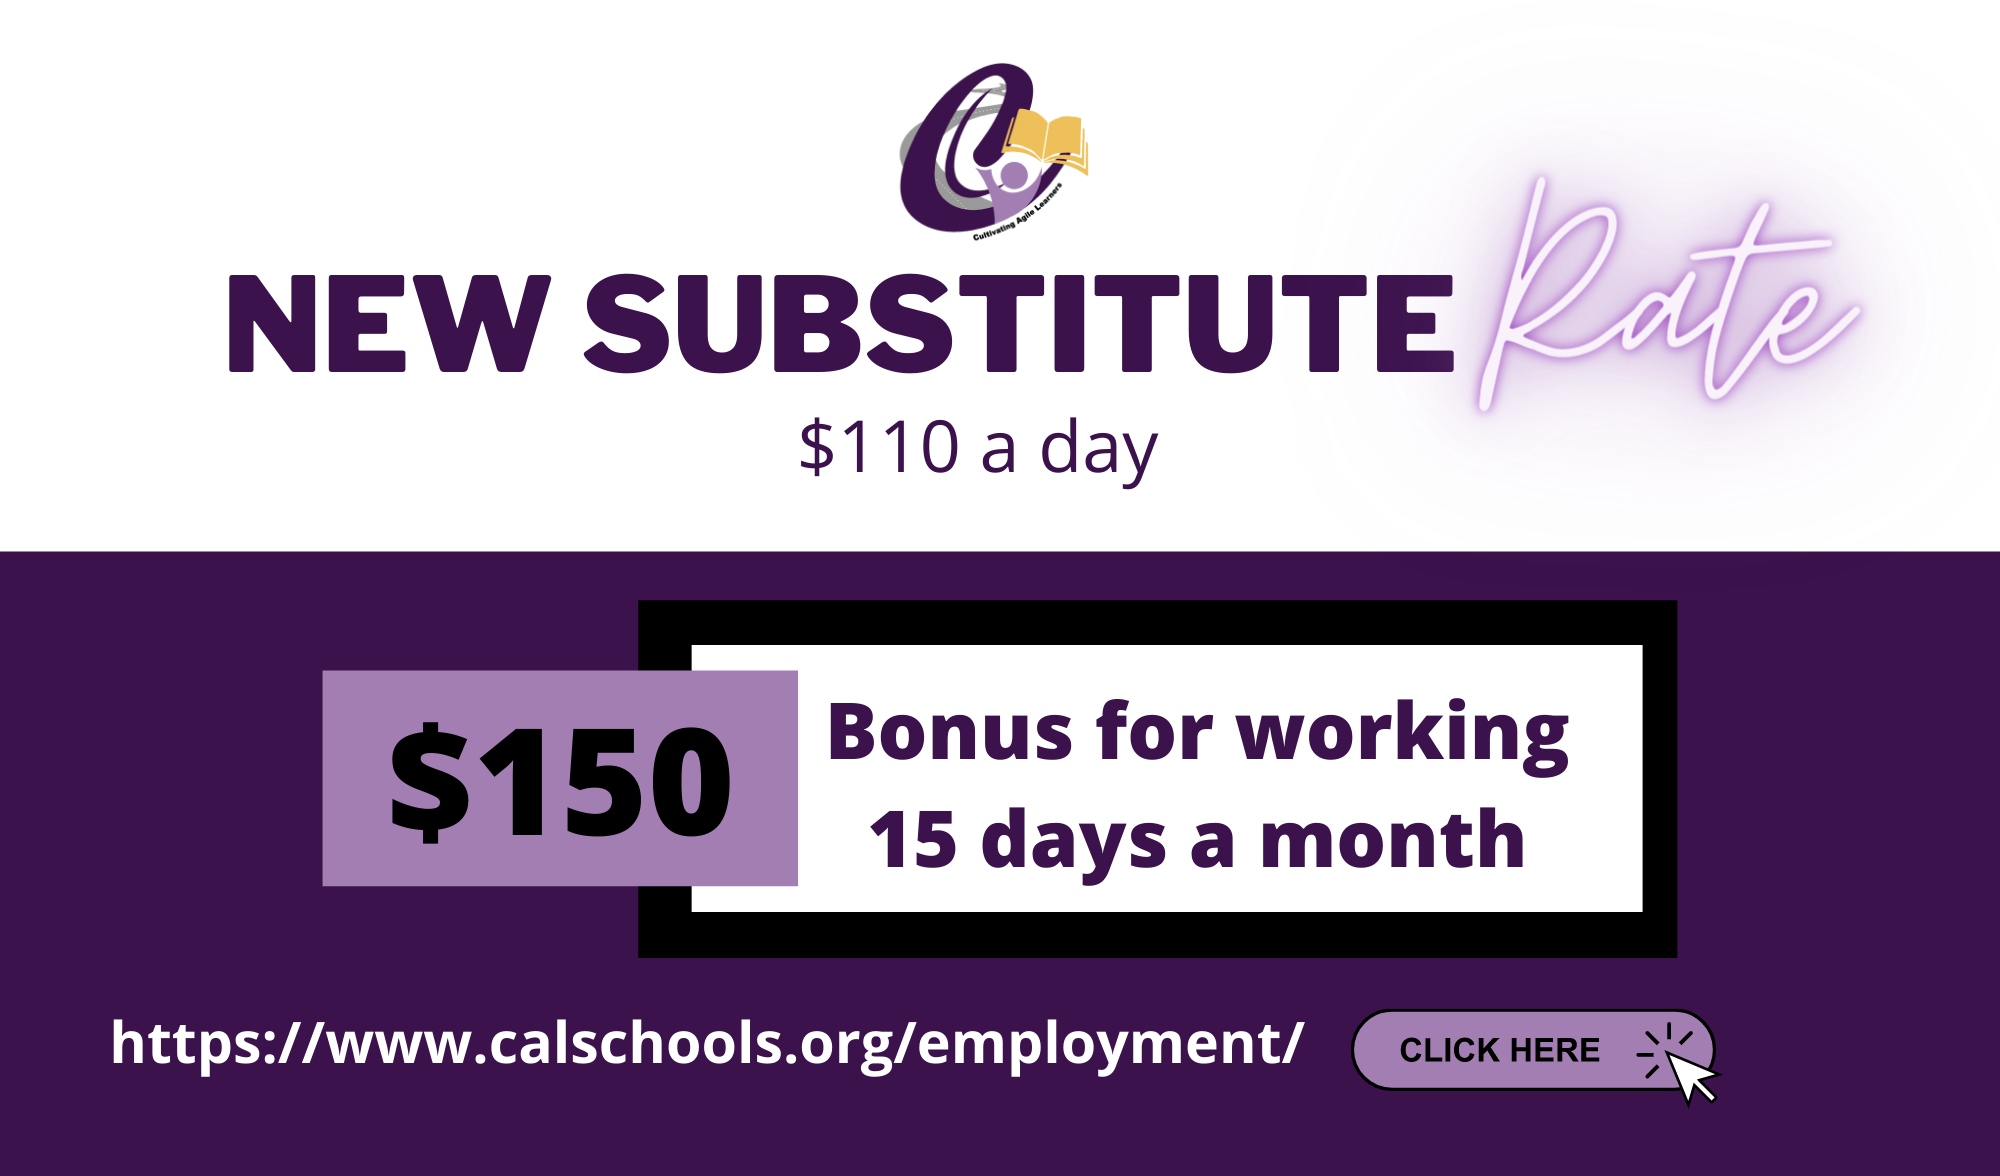 New Substitute Rate